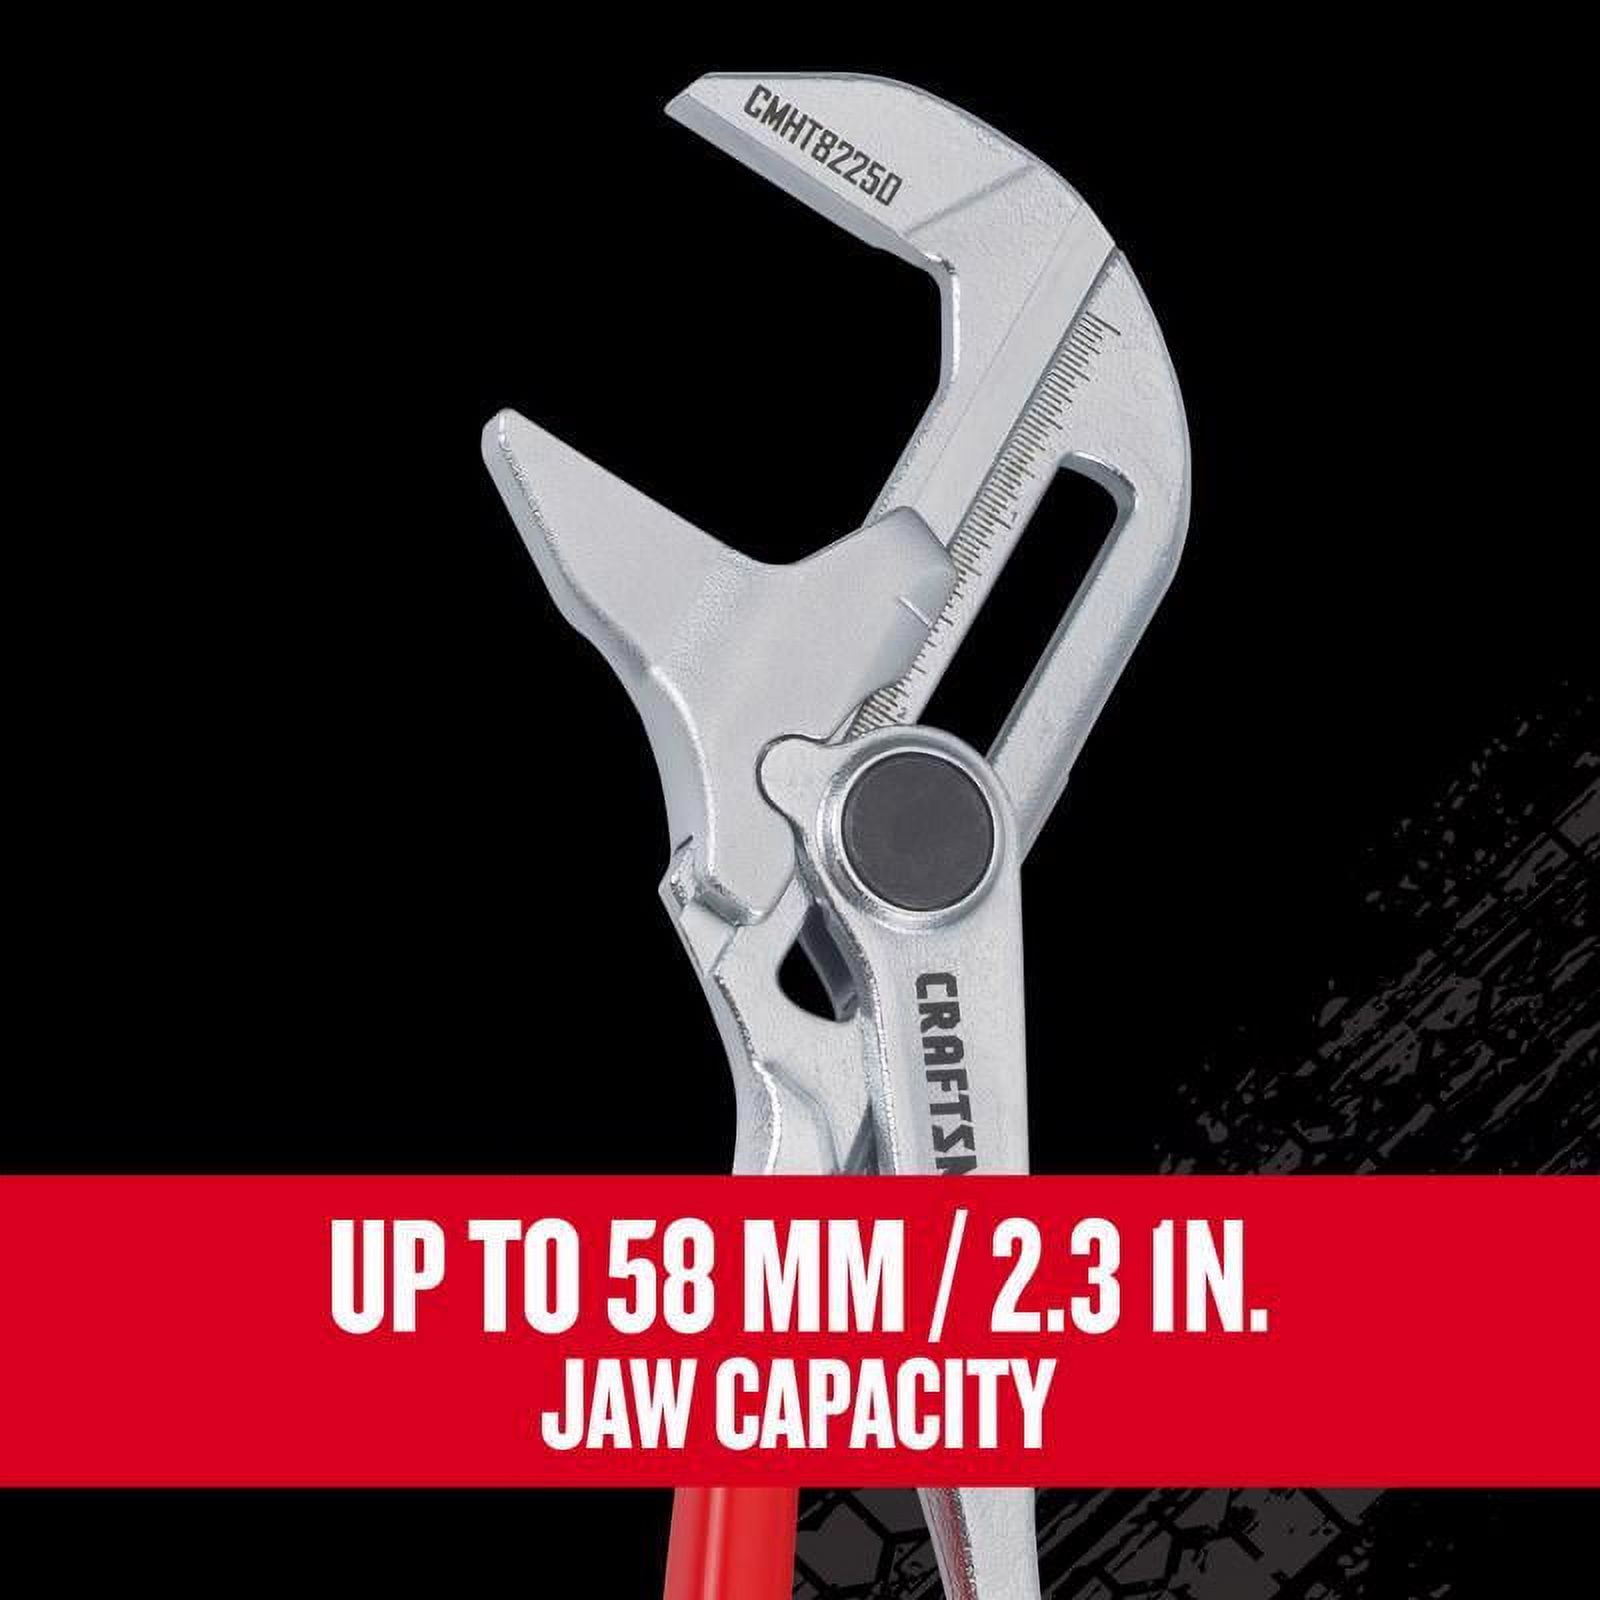 Meet the New Craftsman Pliers Wrench